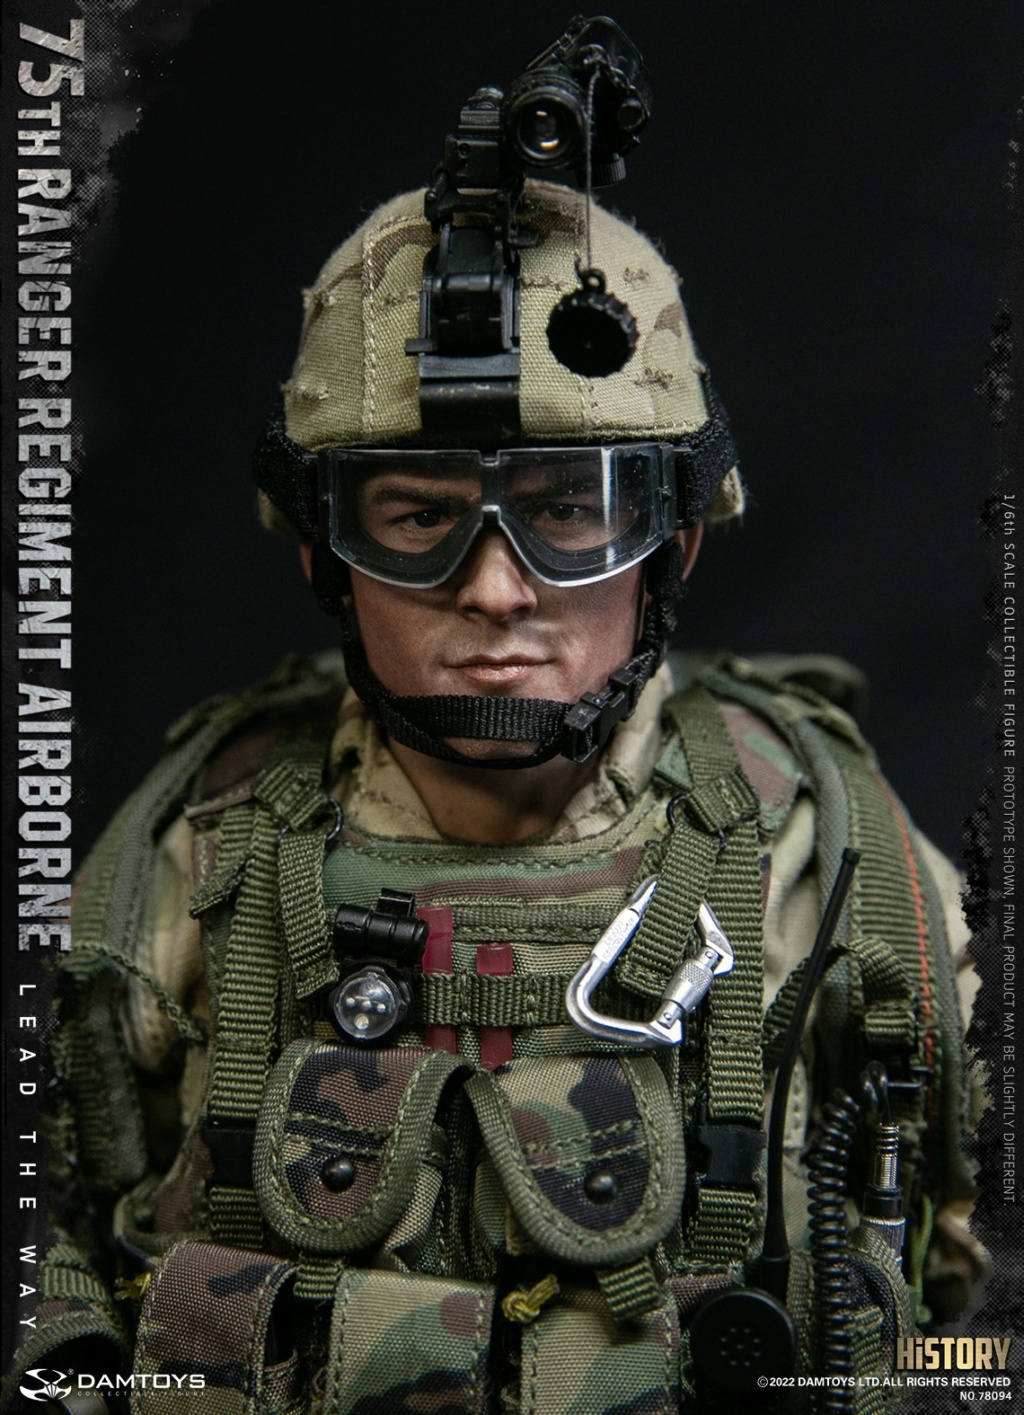 NEW PRODUCT: DAMTOYS: 78094 1/6 Scale 75th RANGER REGIMENT AIRBORNE 13320210